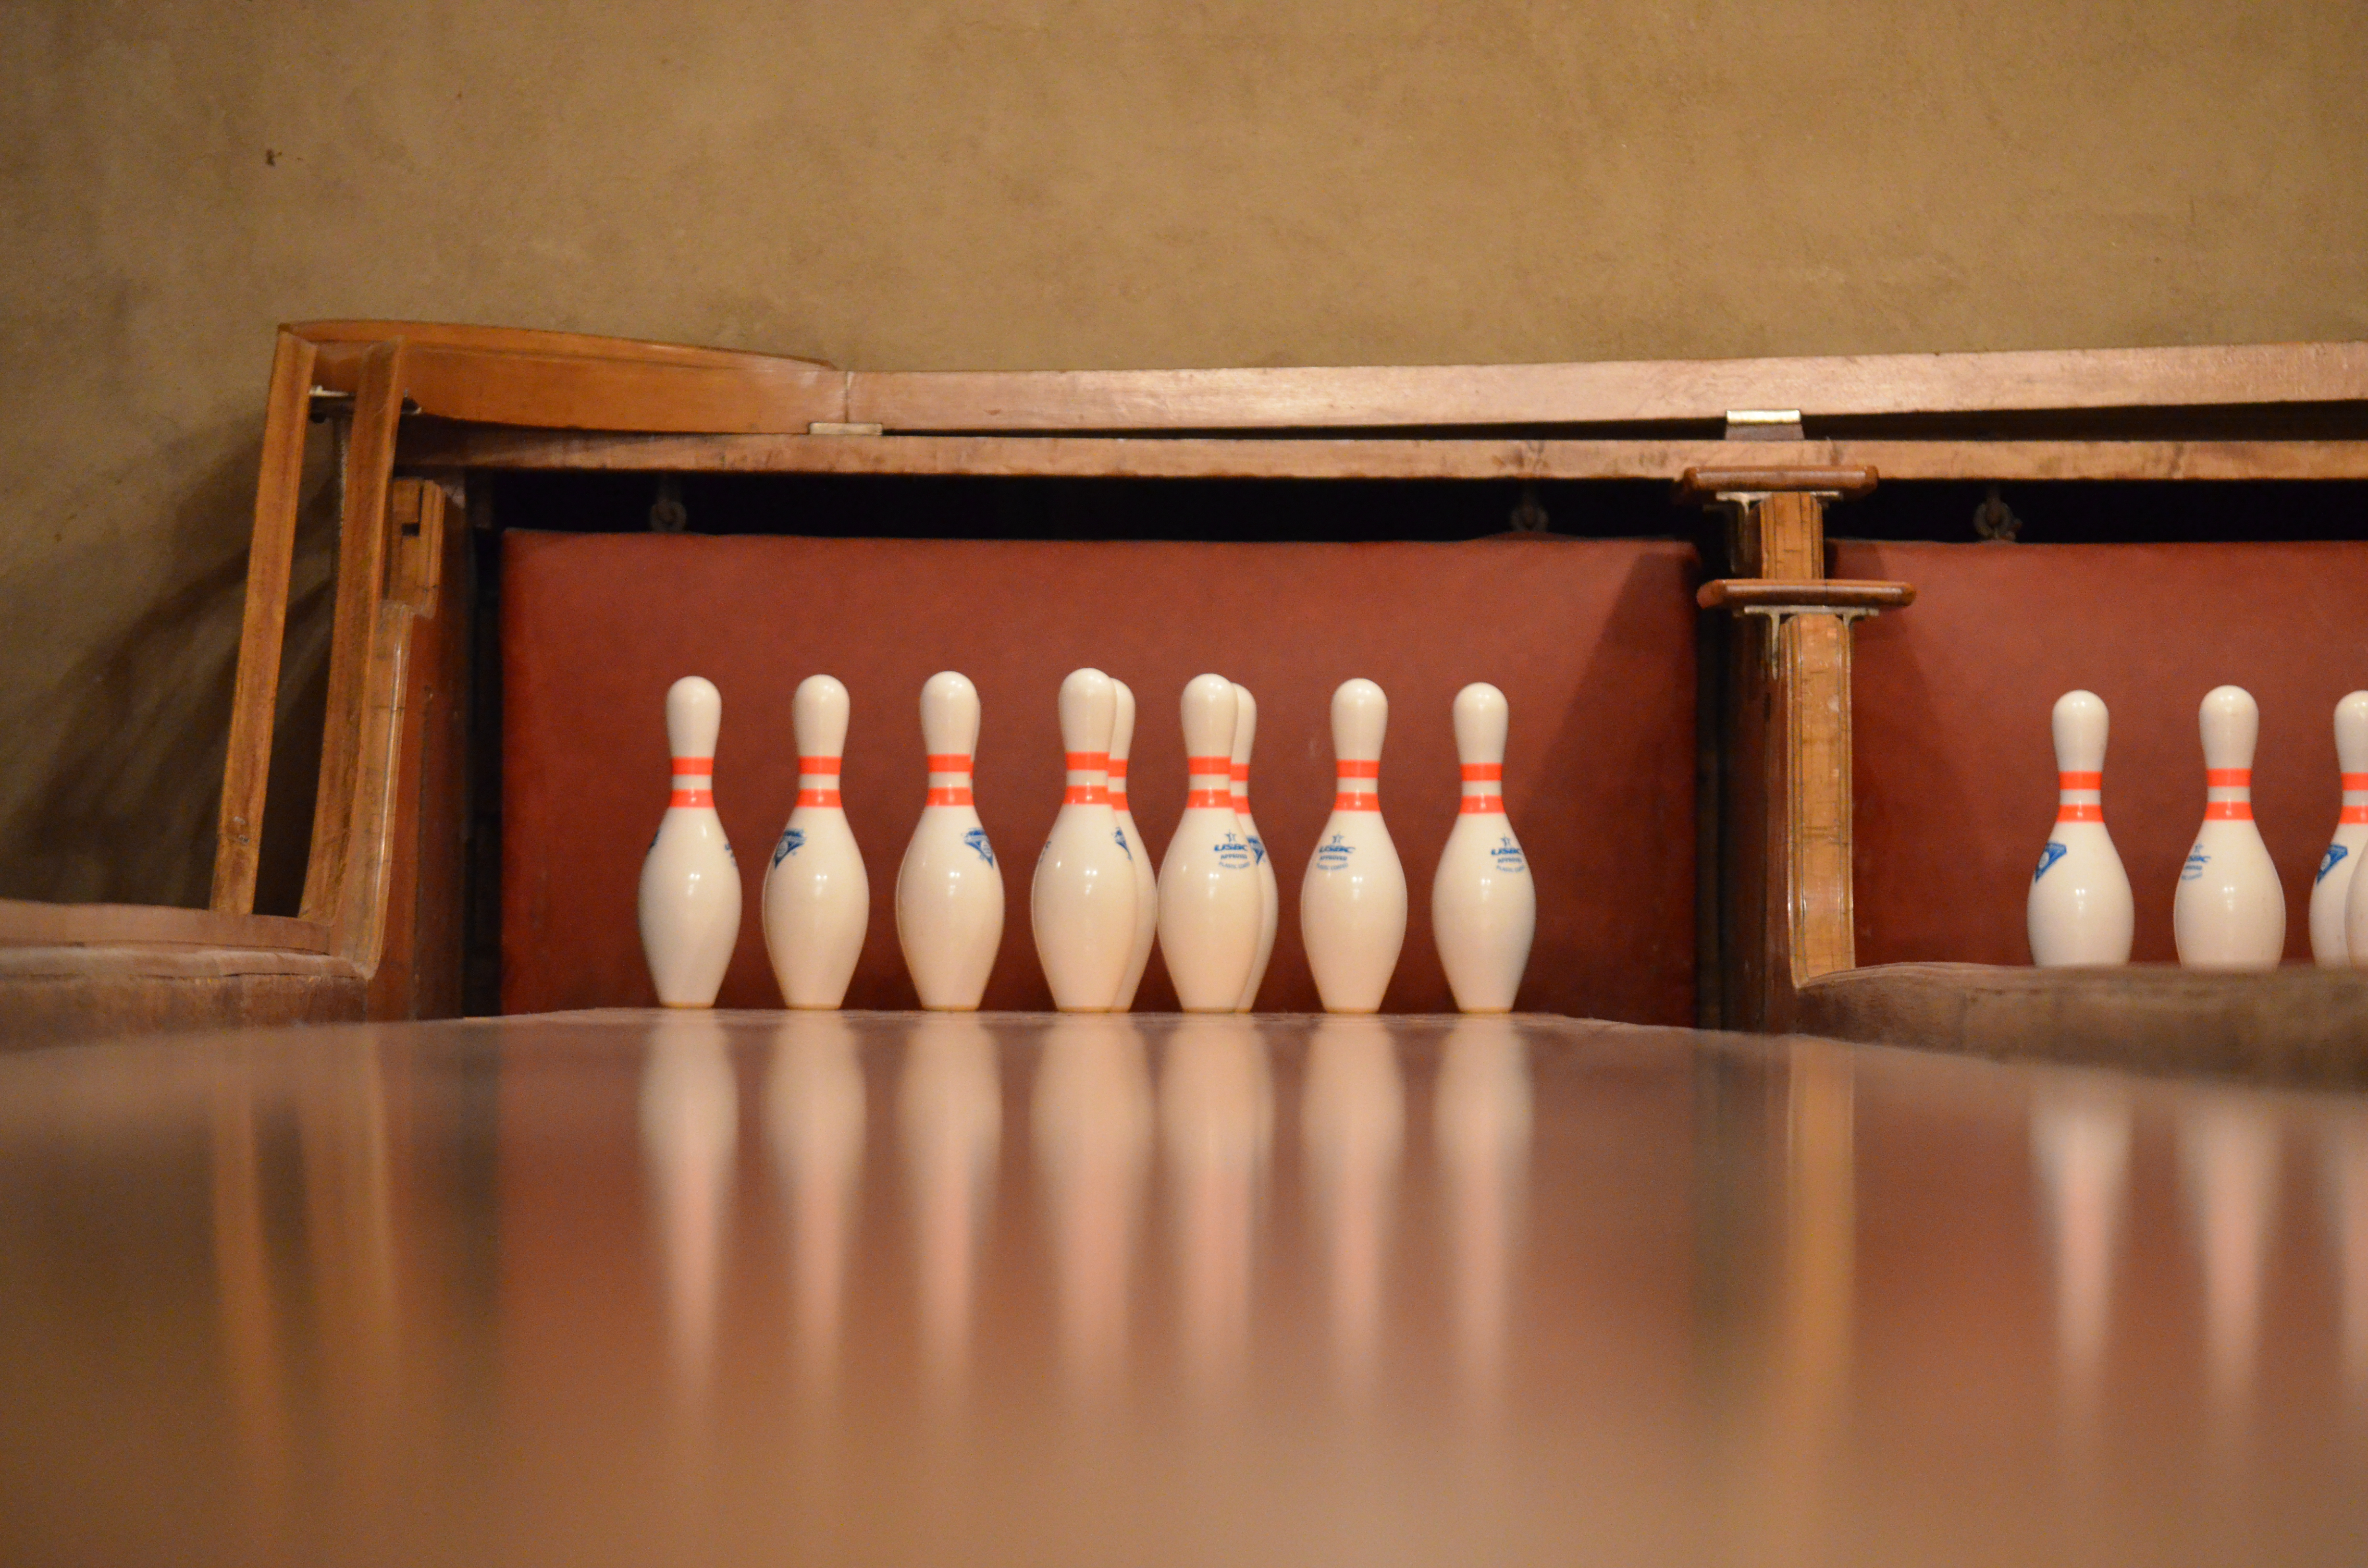 The pins at the Frick Collection bowling alley as seen in late 2012 (credit: Evan Bindelglass / CBSNewYork)